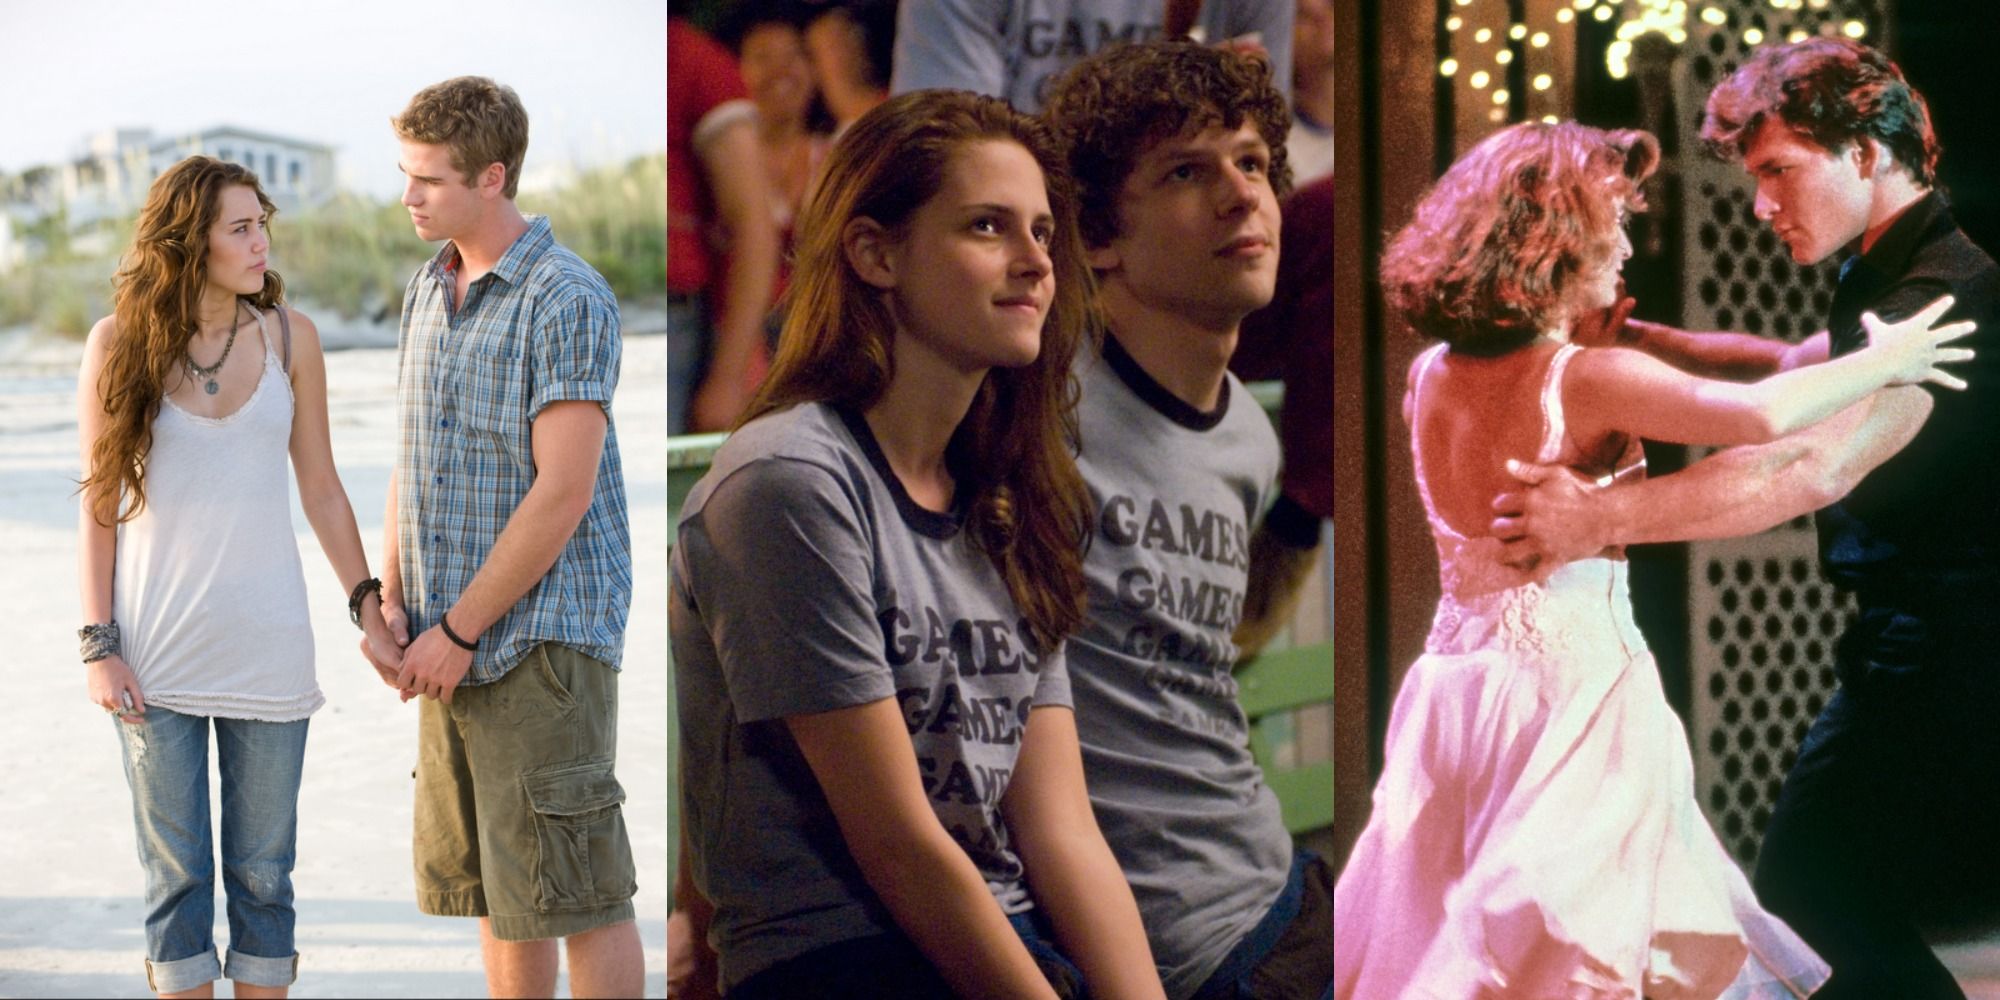 Stills from The Last Song, Adventureland, and Dirty Dancing